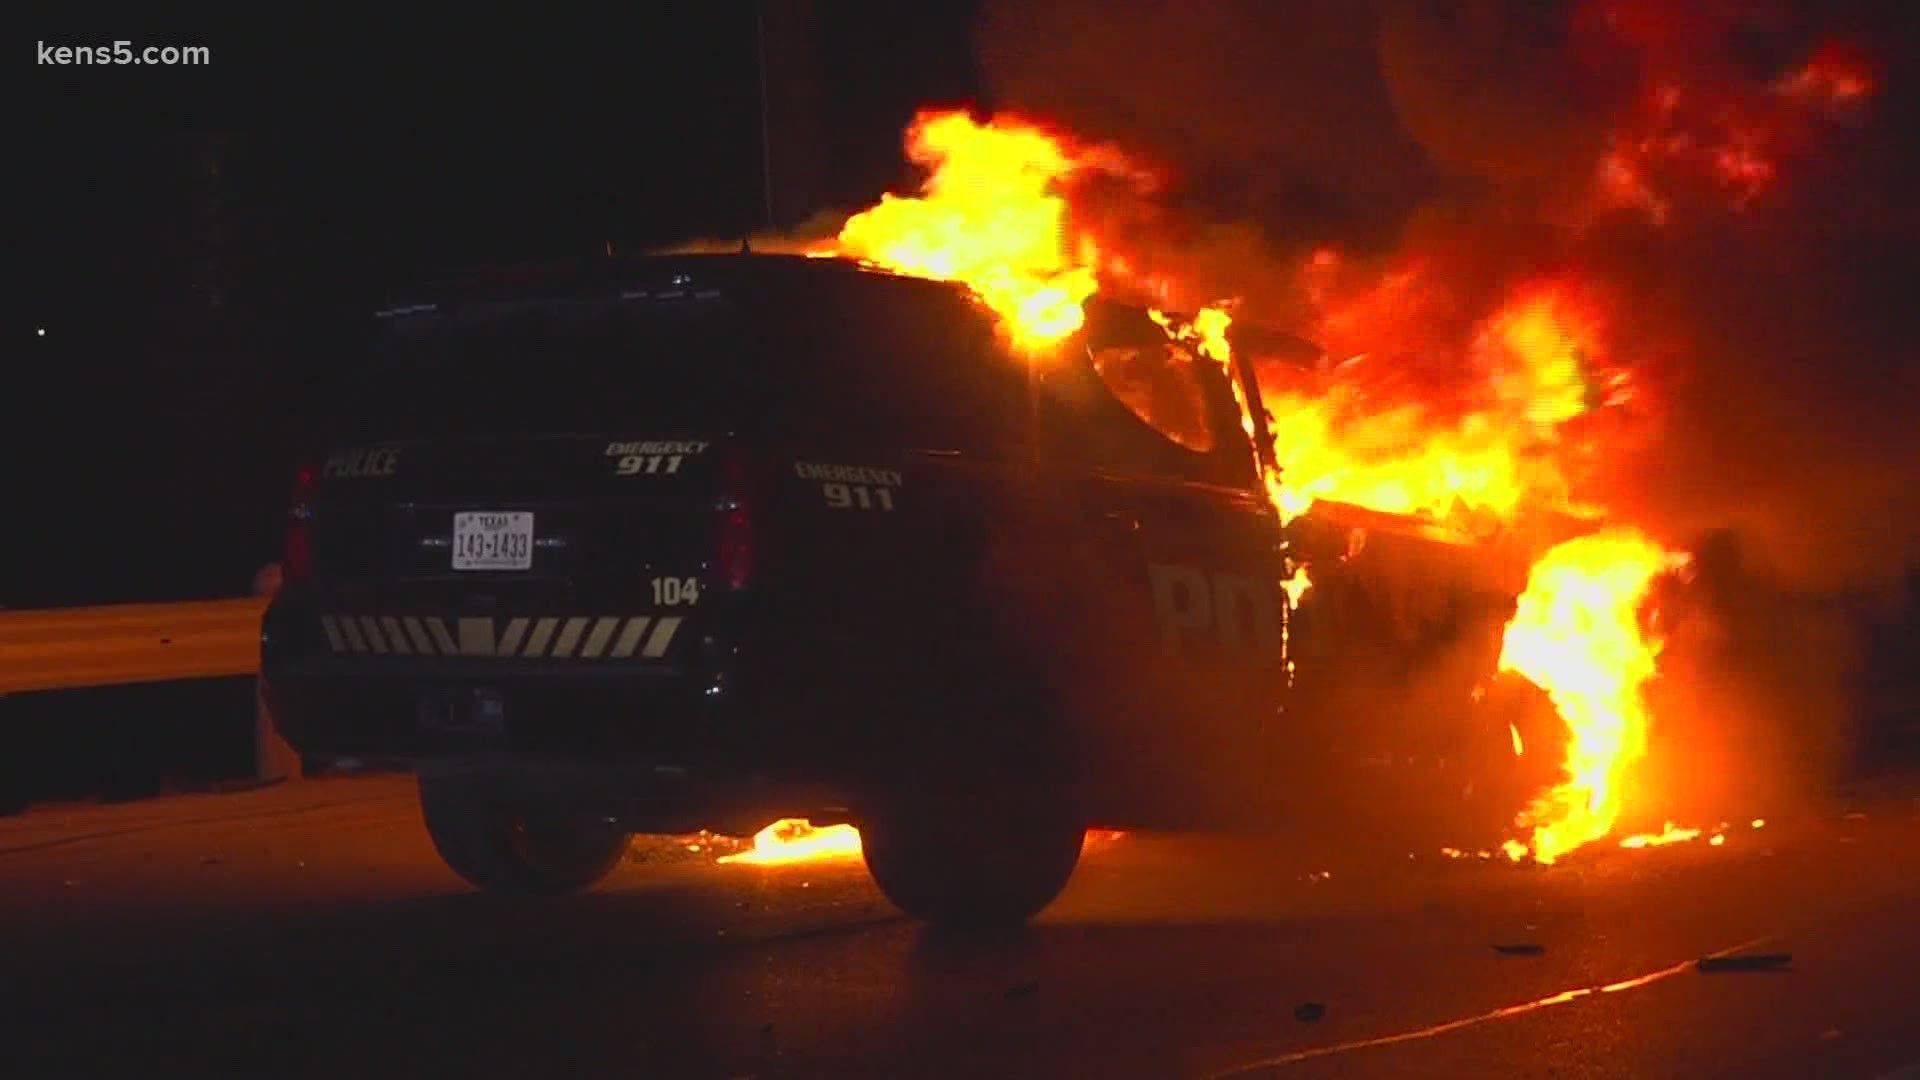 A Von Ormy officer's patrol car burst into flames after a wrong-way driver crashed into him, the San Antonio Police Department said.